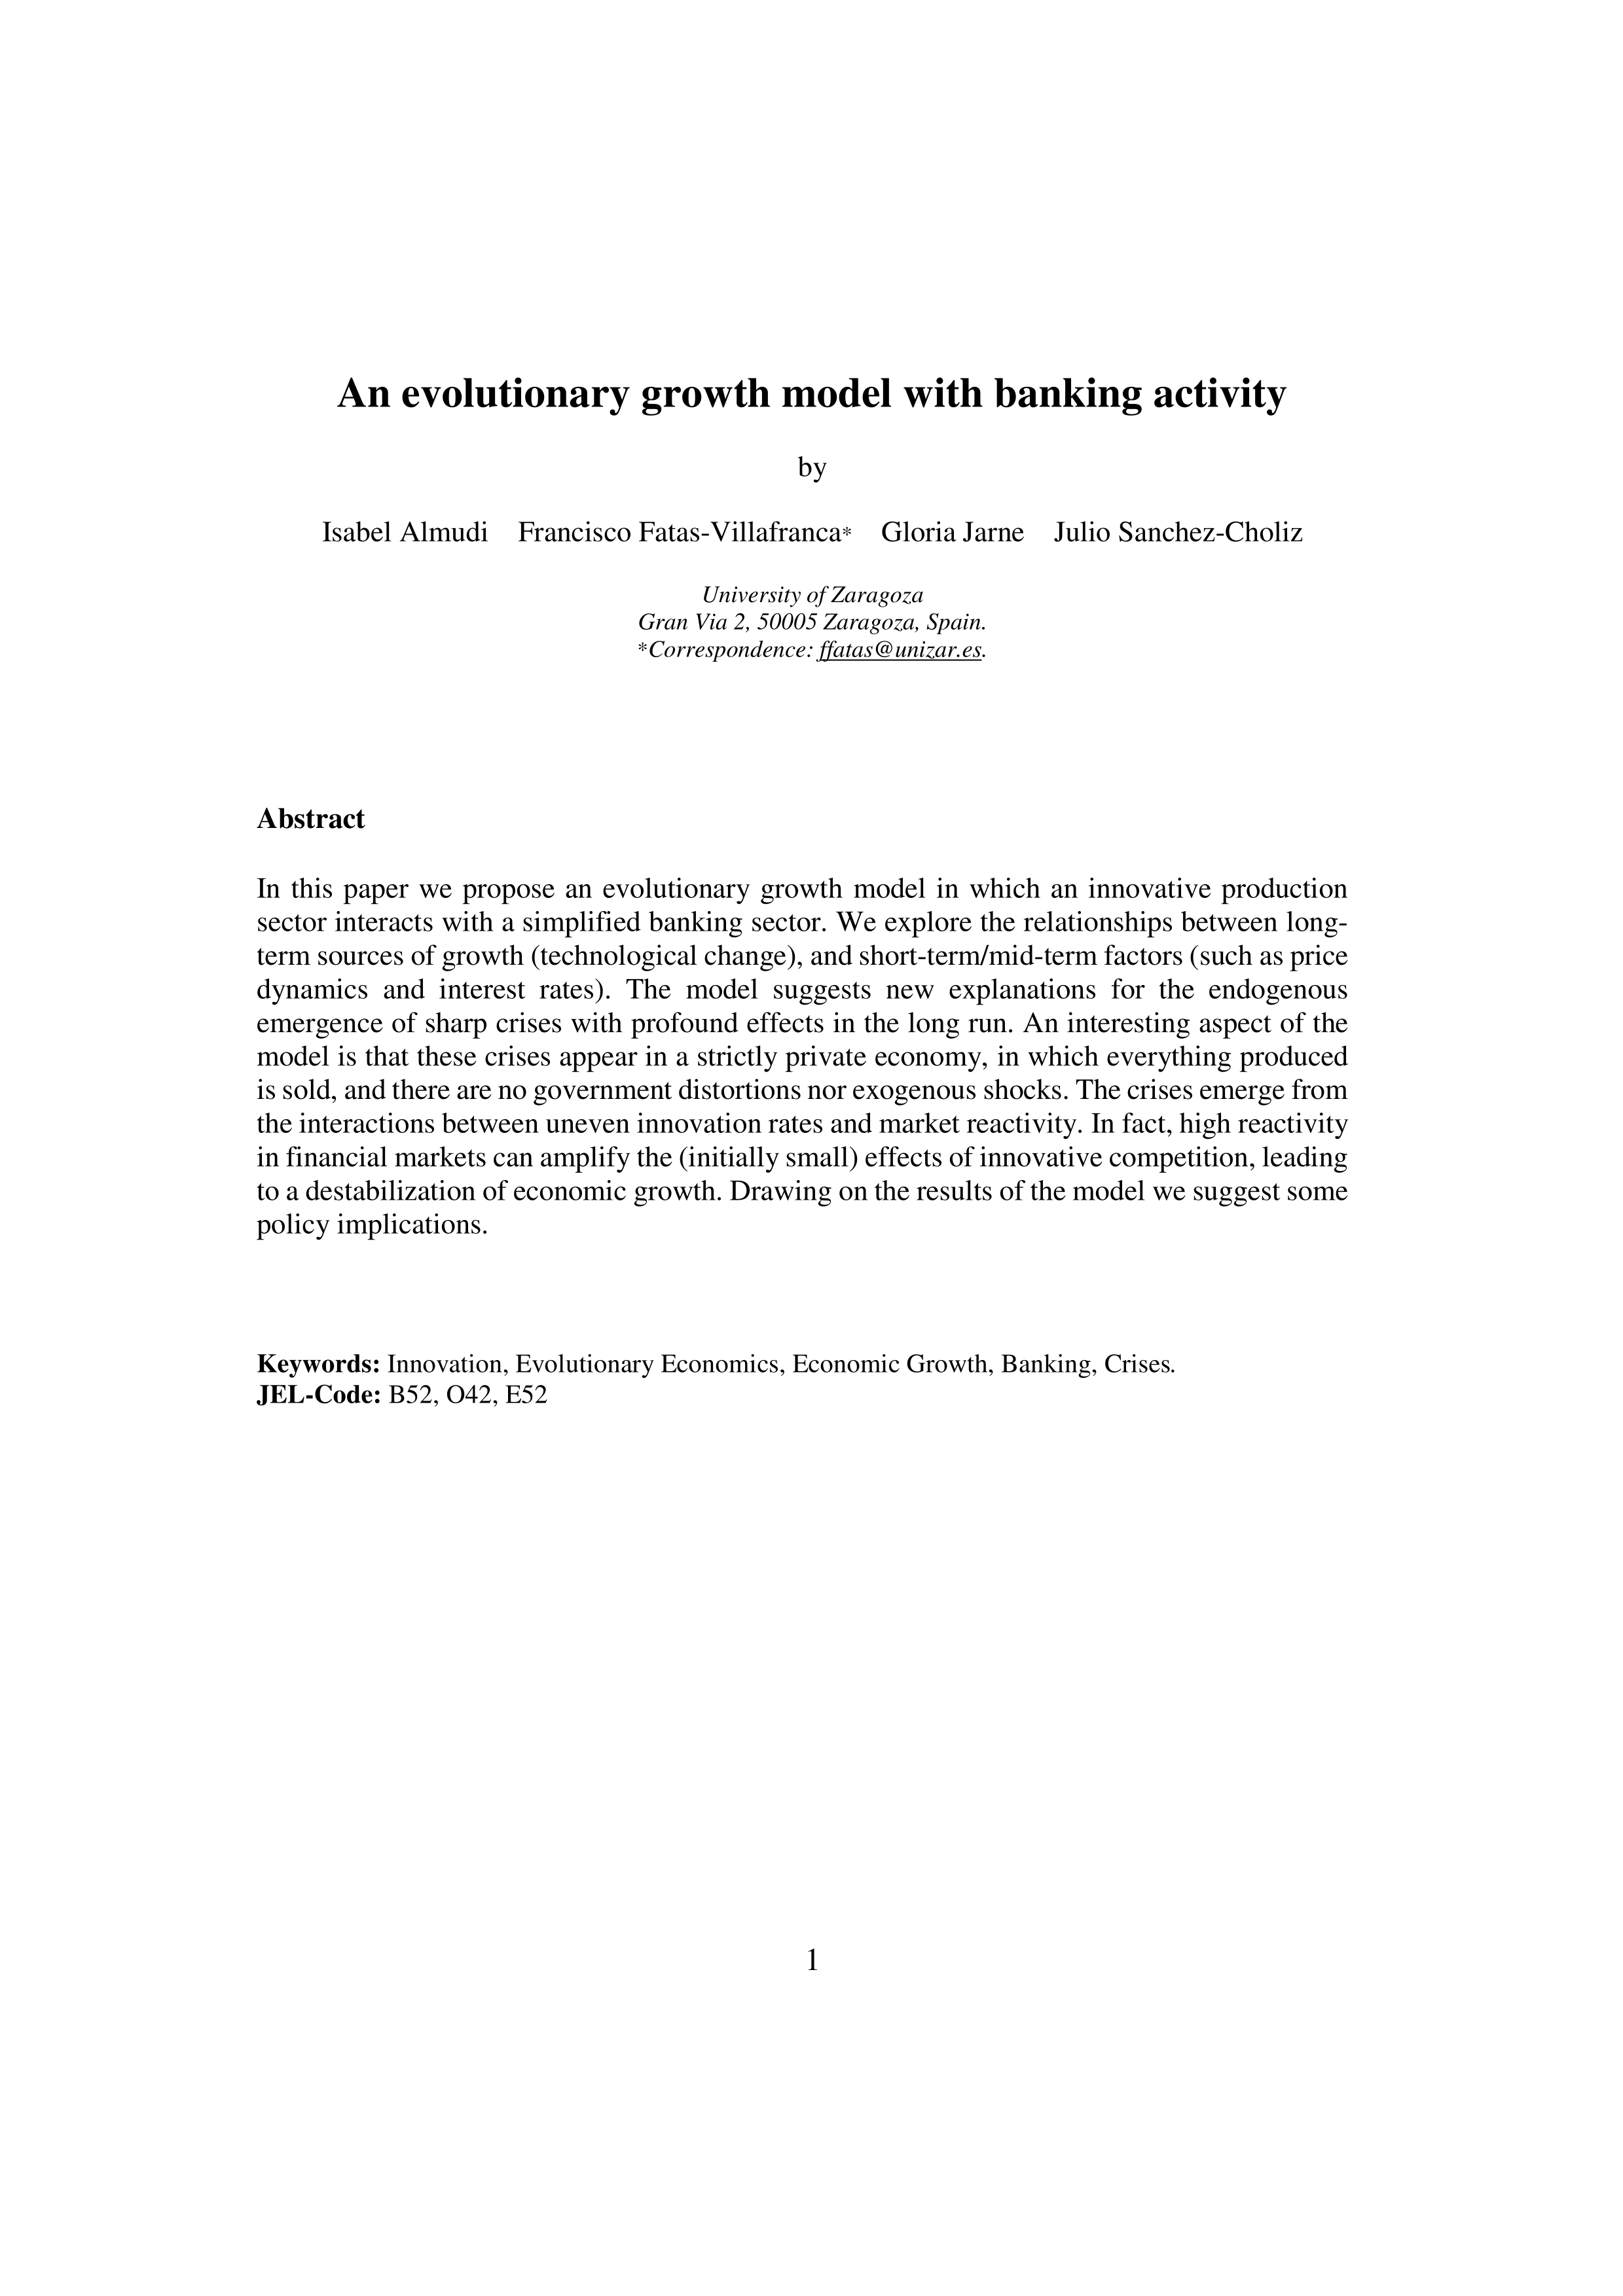 An evolutionary growth model with banking activity